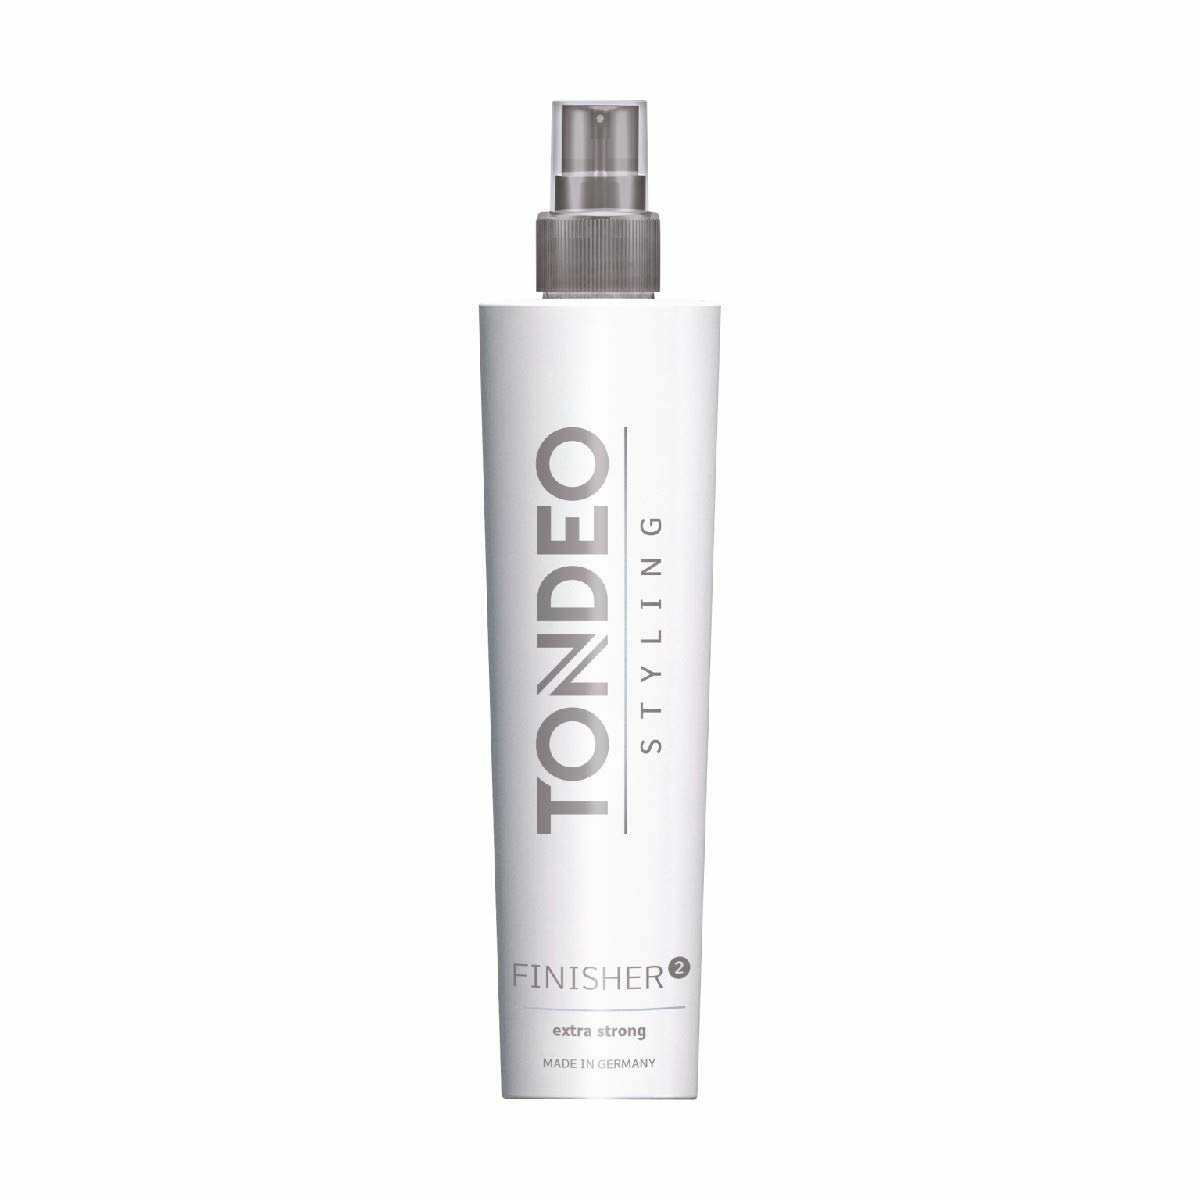 Tondeo Finisher 2 extra strong 200ml